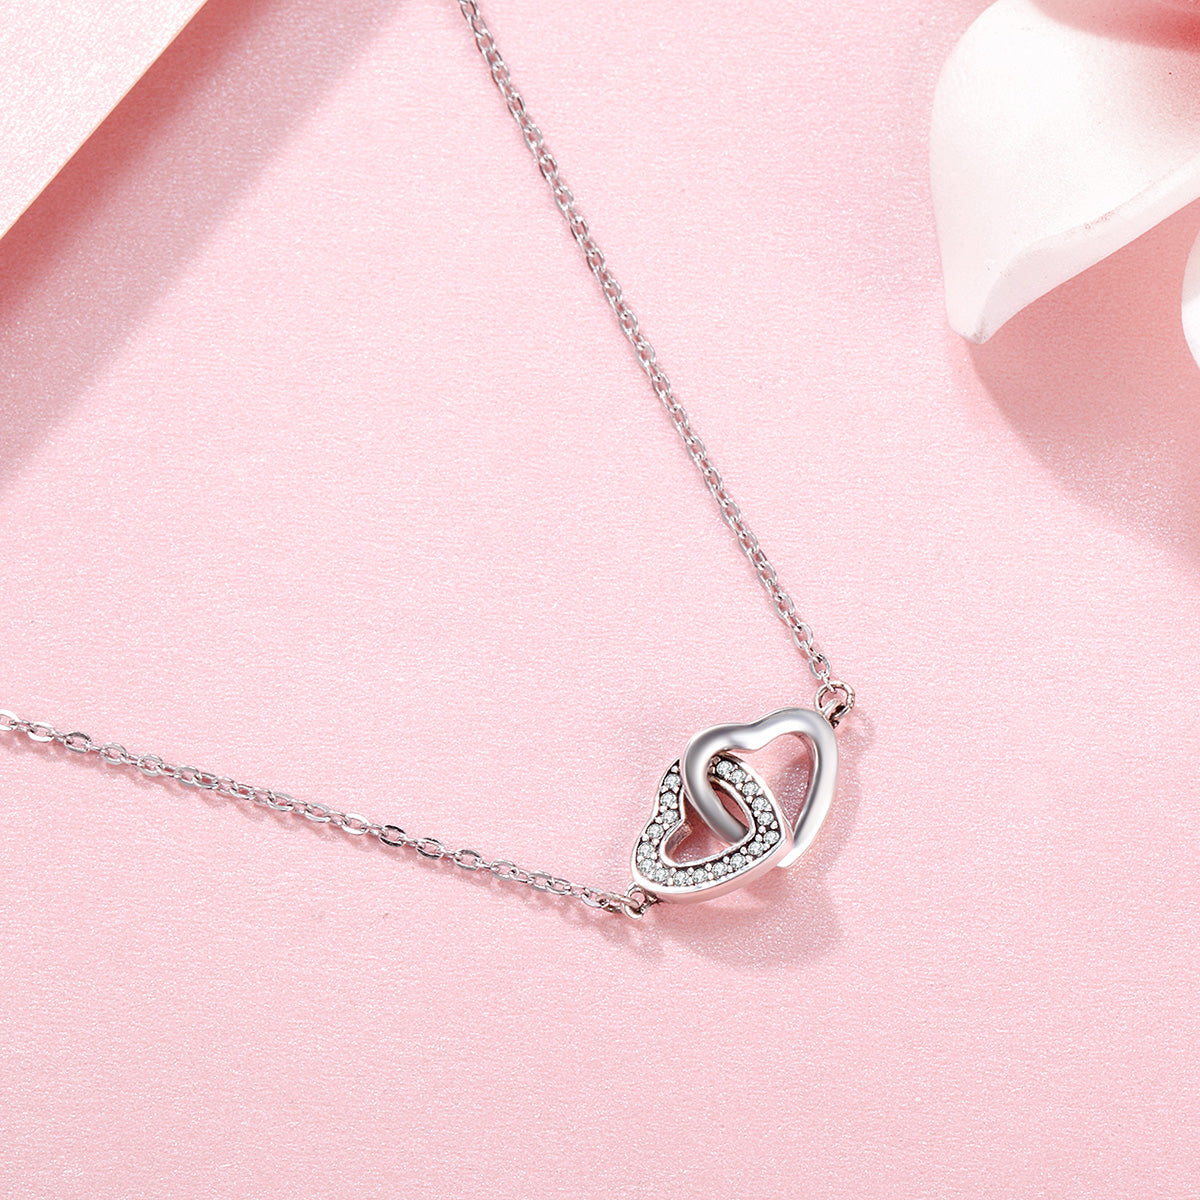 Sterling Silver Intertwined Hearts Hypoallergenic Necklace